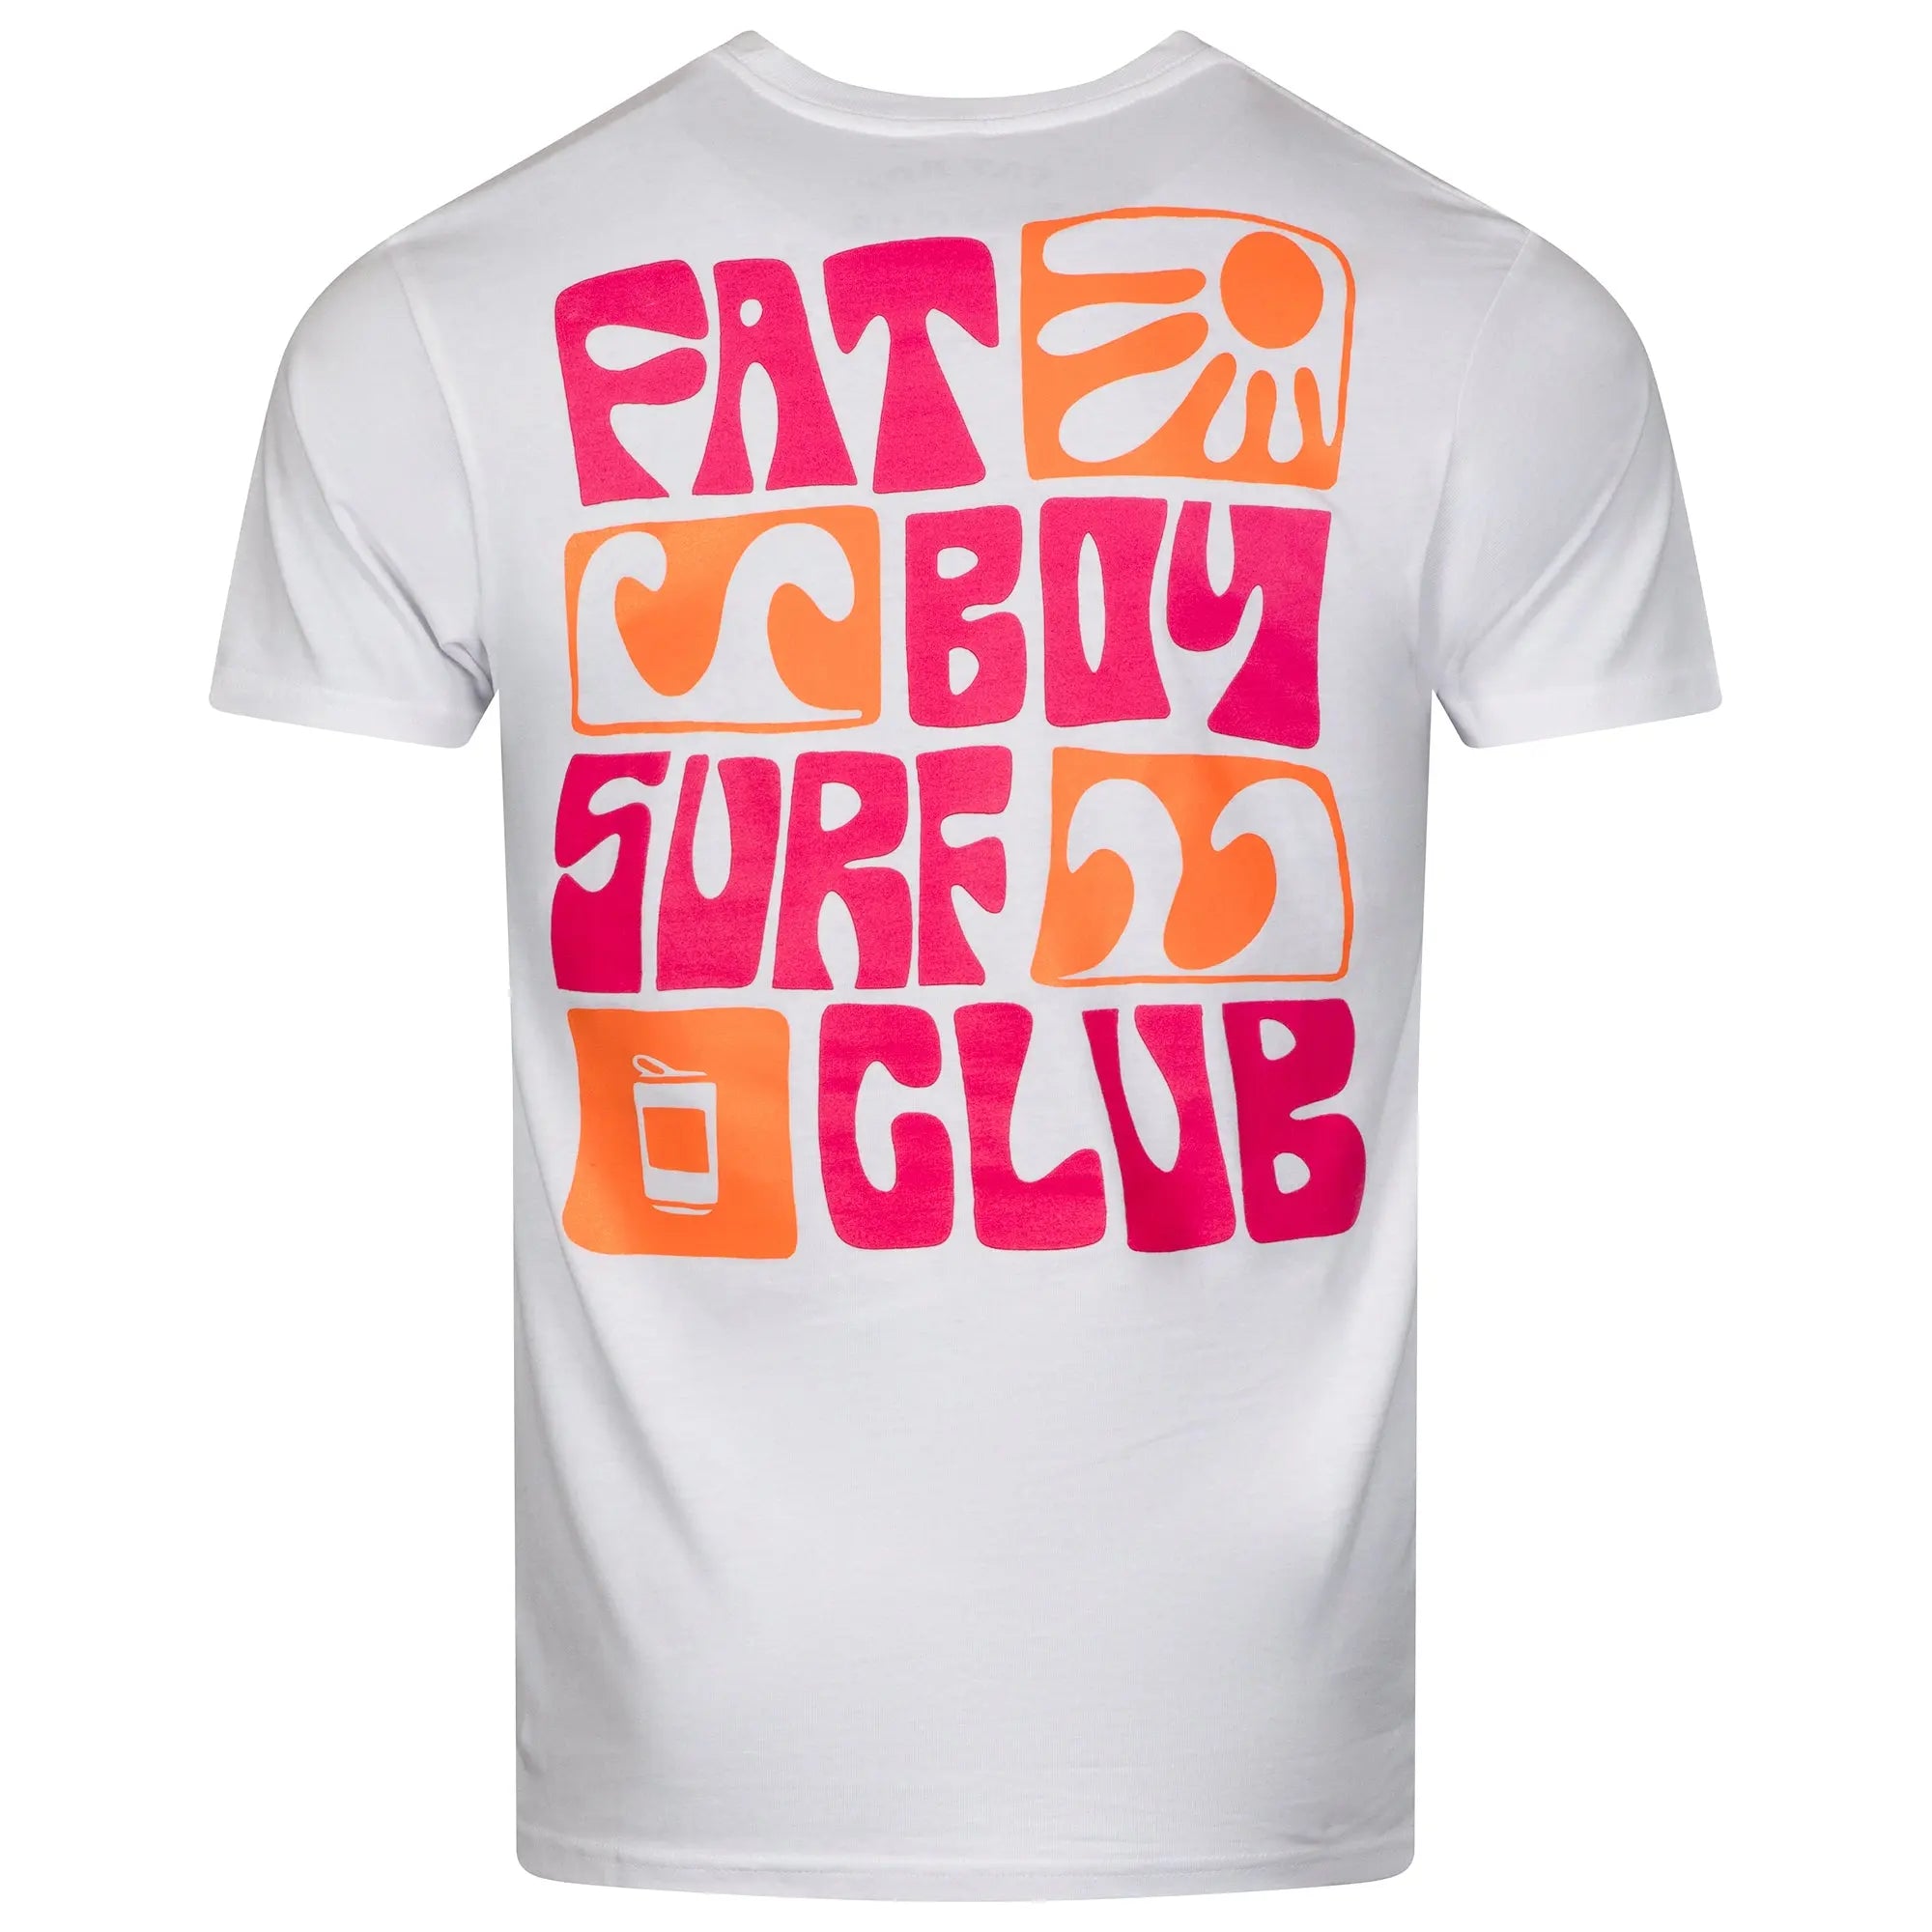 Waves and Rays Tee Fat Boy Surf Club